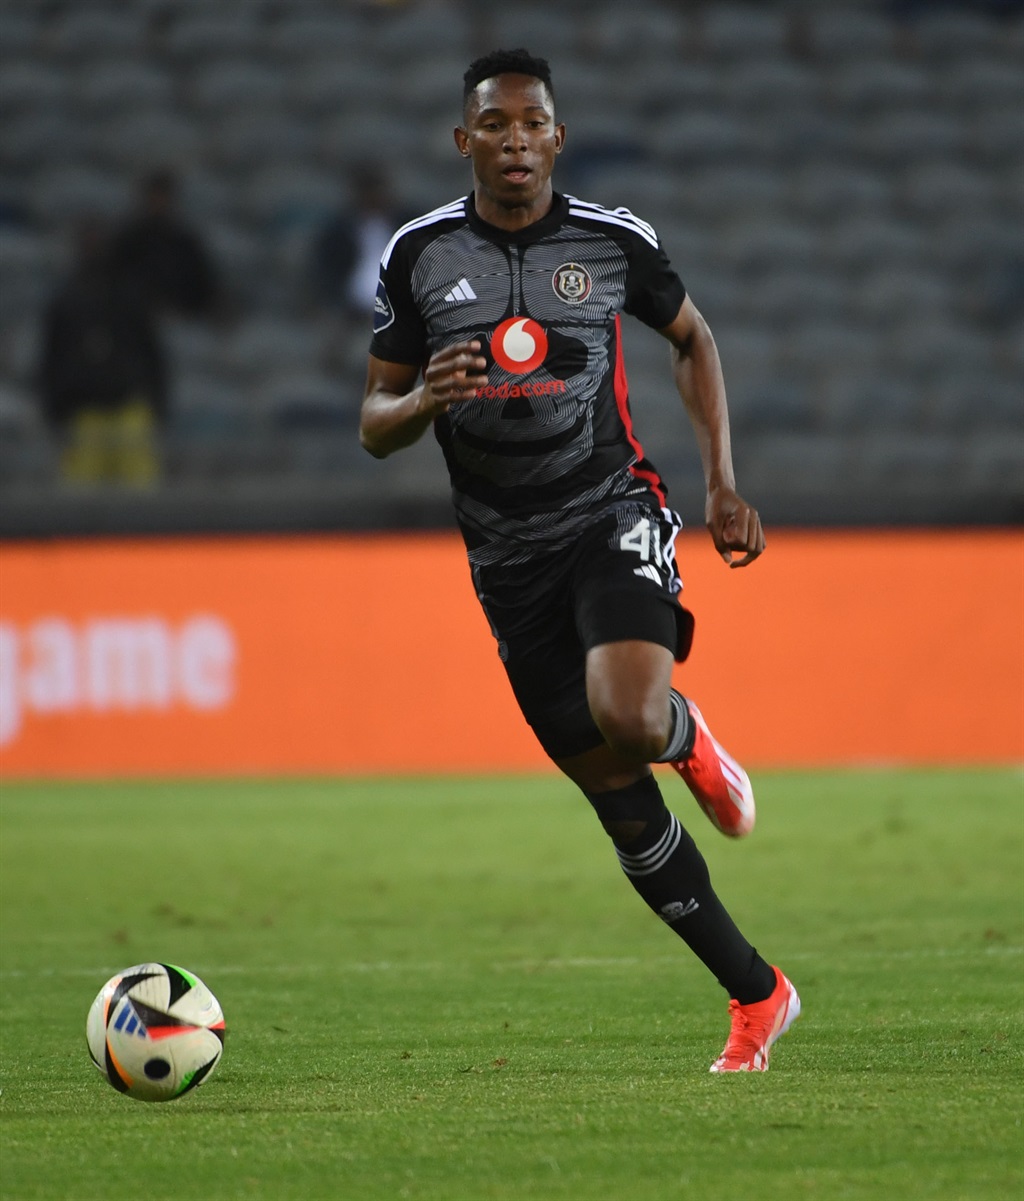 JOHANNESBURG, SOUTH AFRICA - MAY 08: Thalente Mbatha of Orlando Pirates during the DStv Premiership match between Orlando Pirates and Chippa United at Orlando Stadium in May 08, 2024 in Johannesburg, South Africa. (Photo by Lee Warren/Gallo Images)